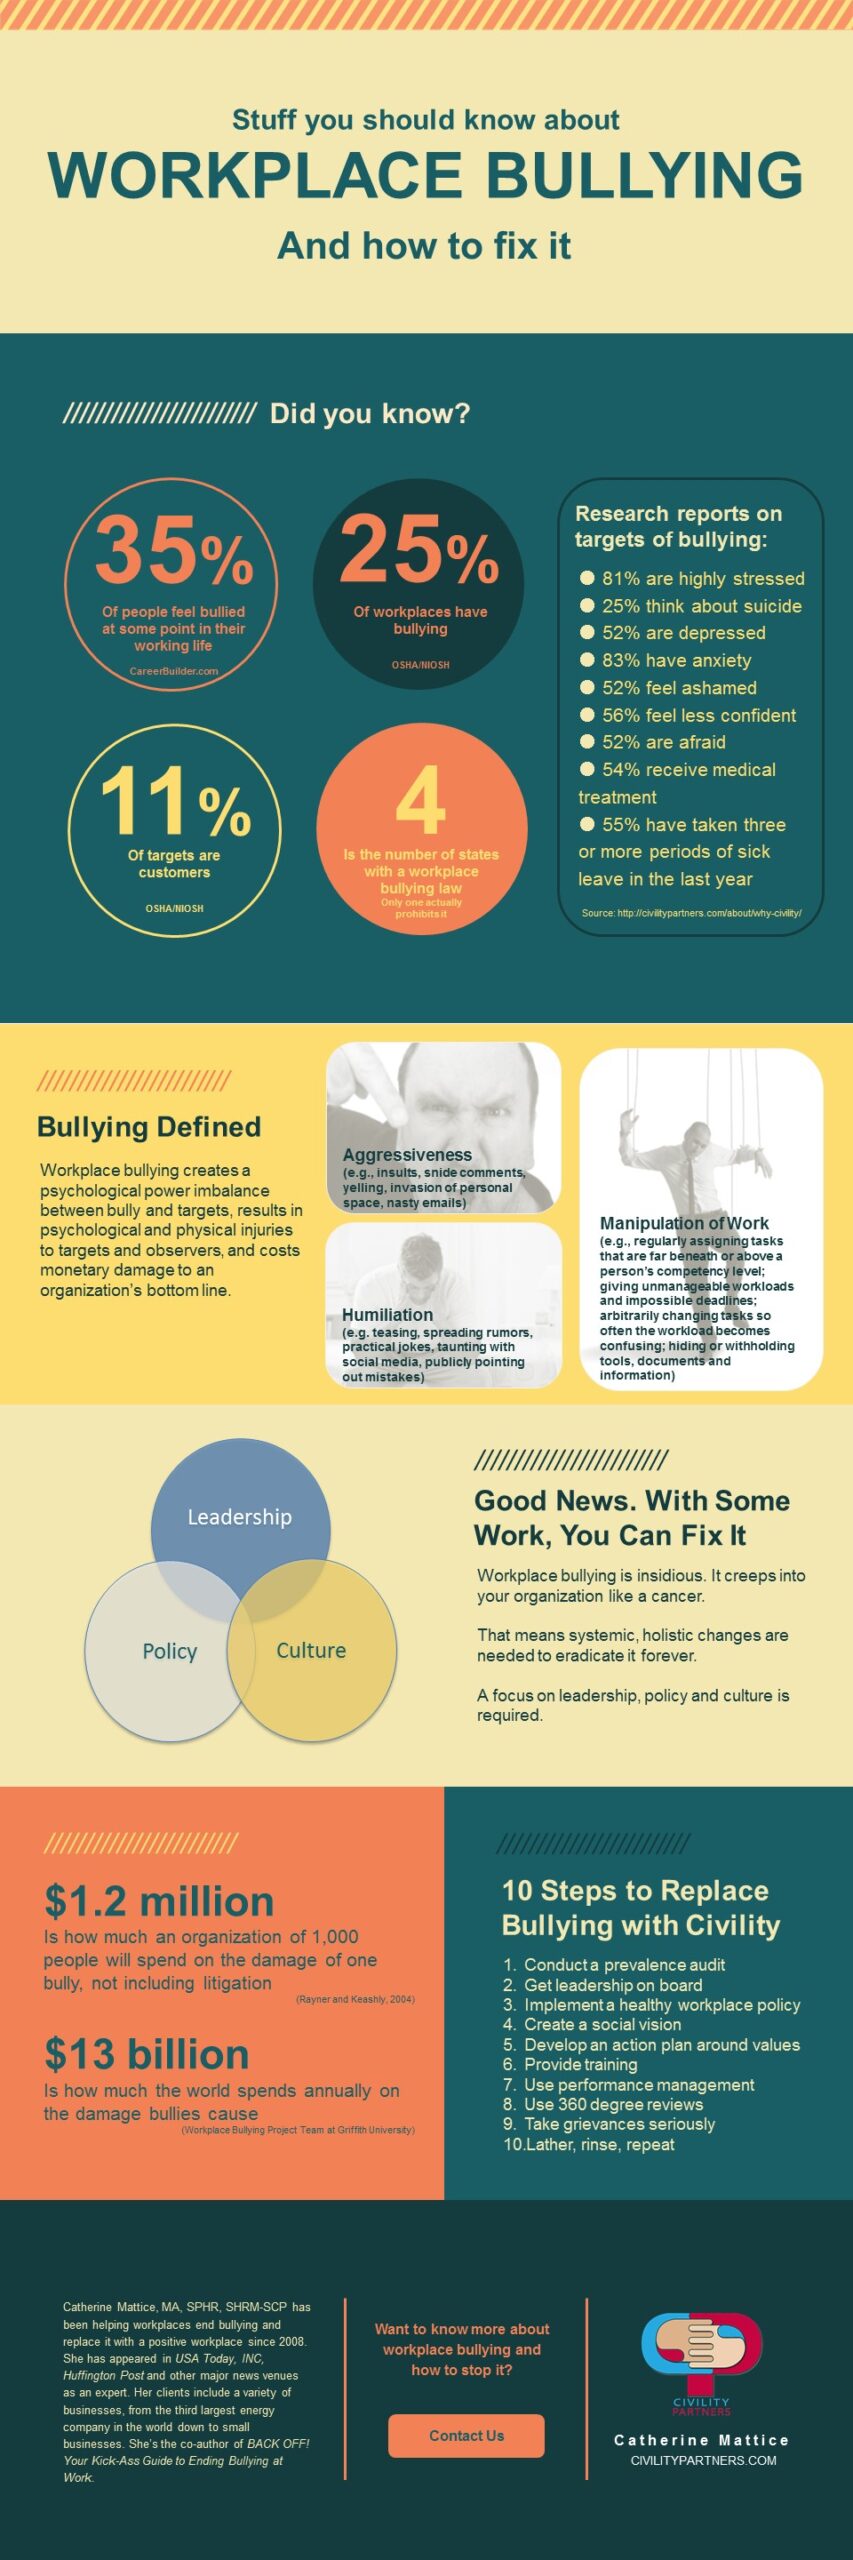 Infographic: California Anti-Bullying Workplace Law and Employee Hotlines | Workplace bullying ...